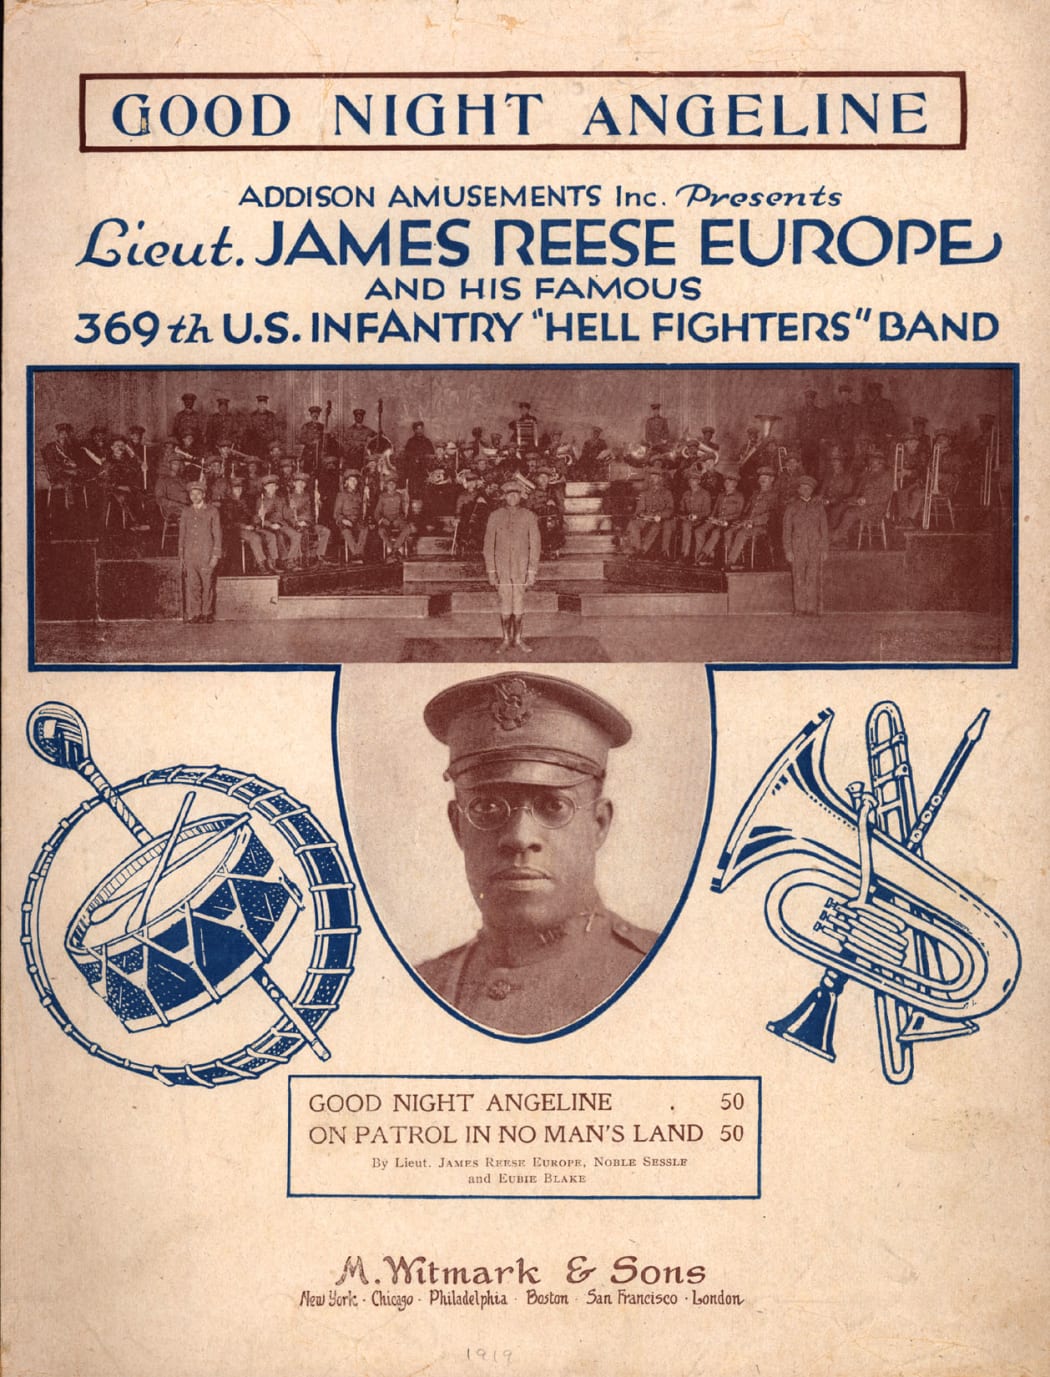 James Reese Europe sometimes known as Jim Europe, was an American ragtime and early jazz bandleader, arranger, and composer.